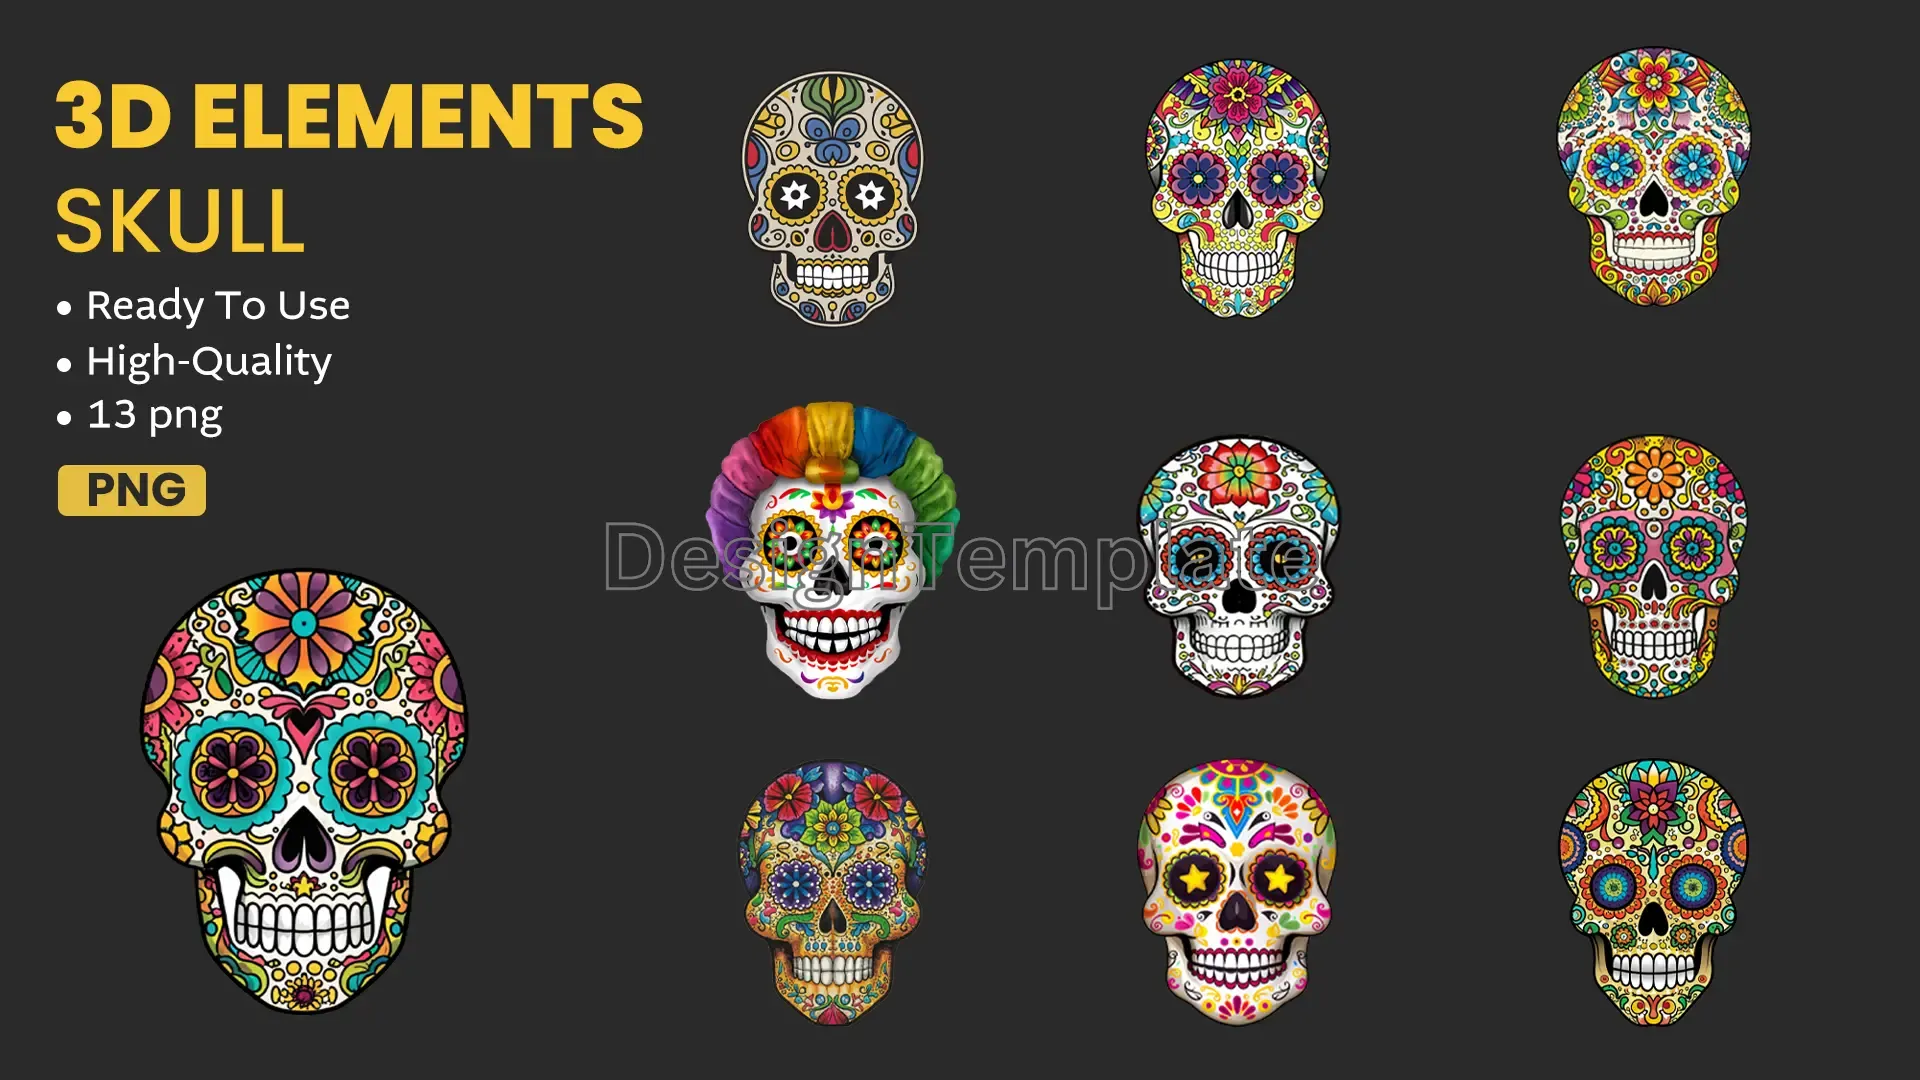 Funky Skull Decorative 3D Elements Pack